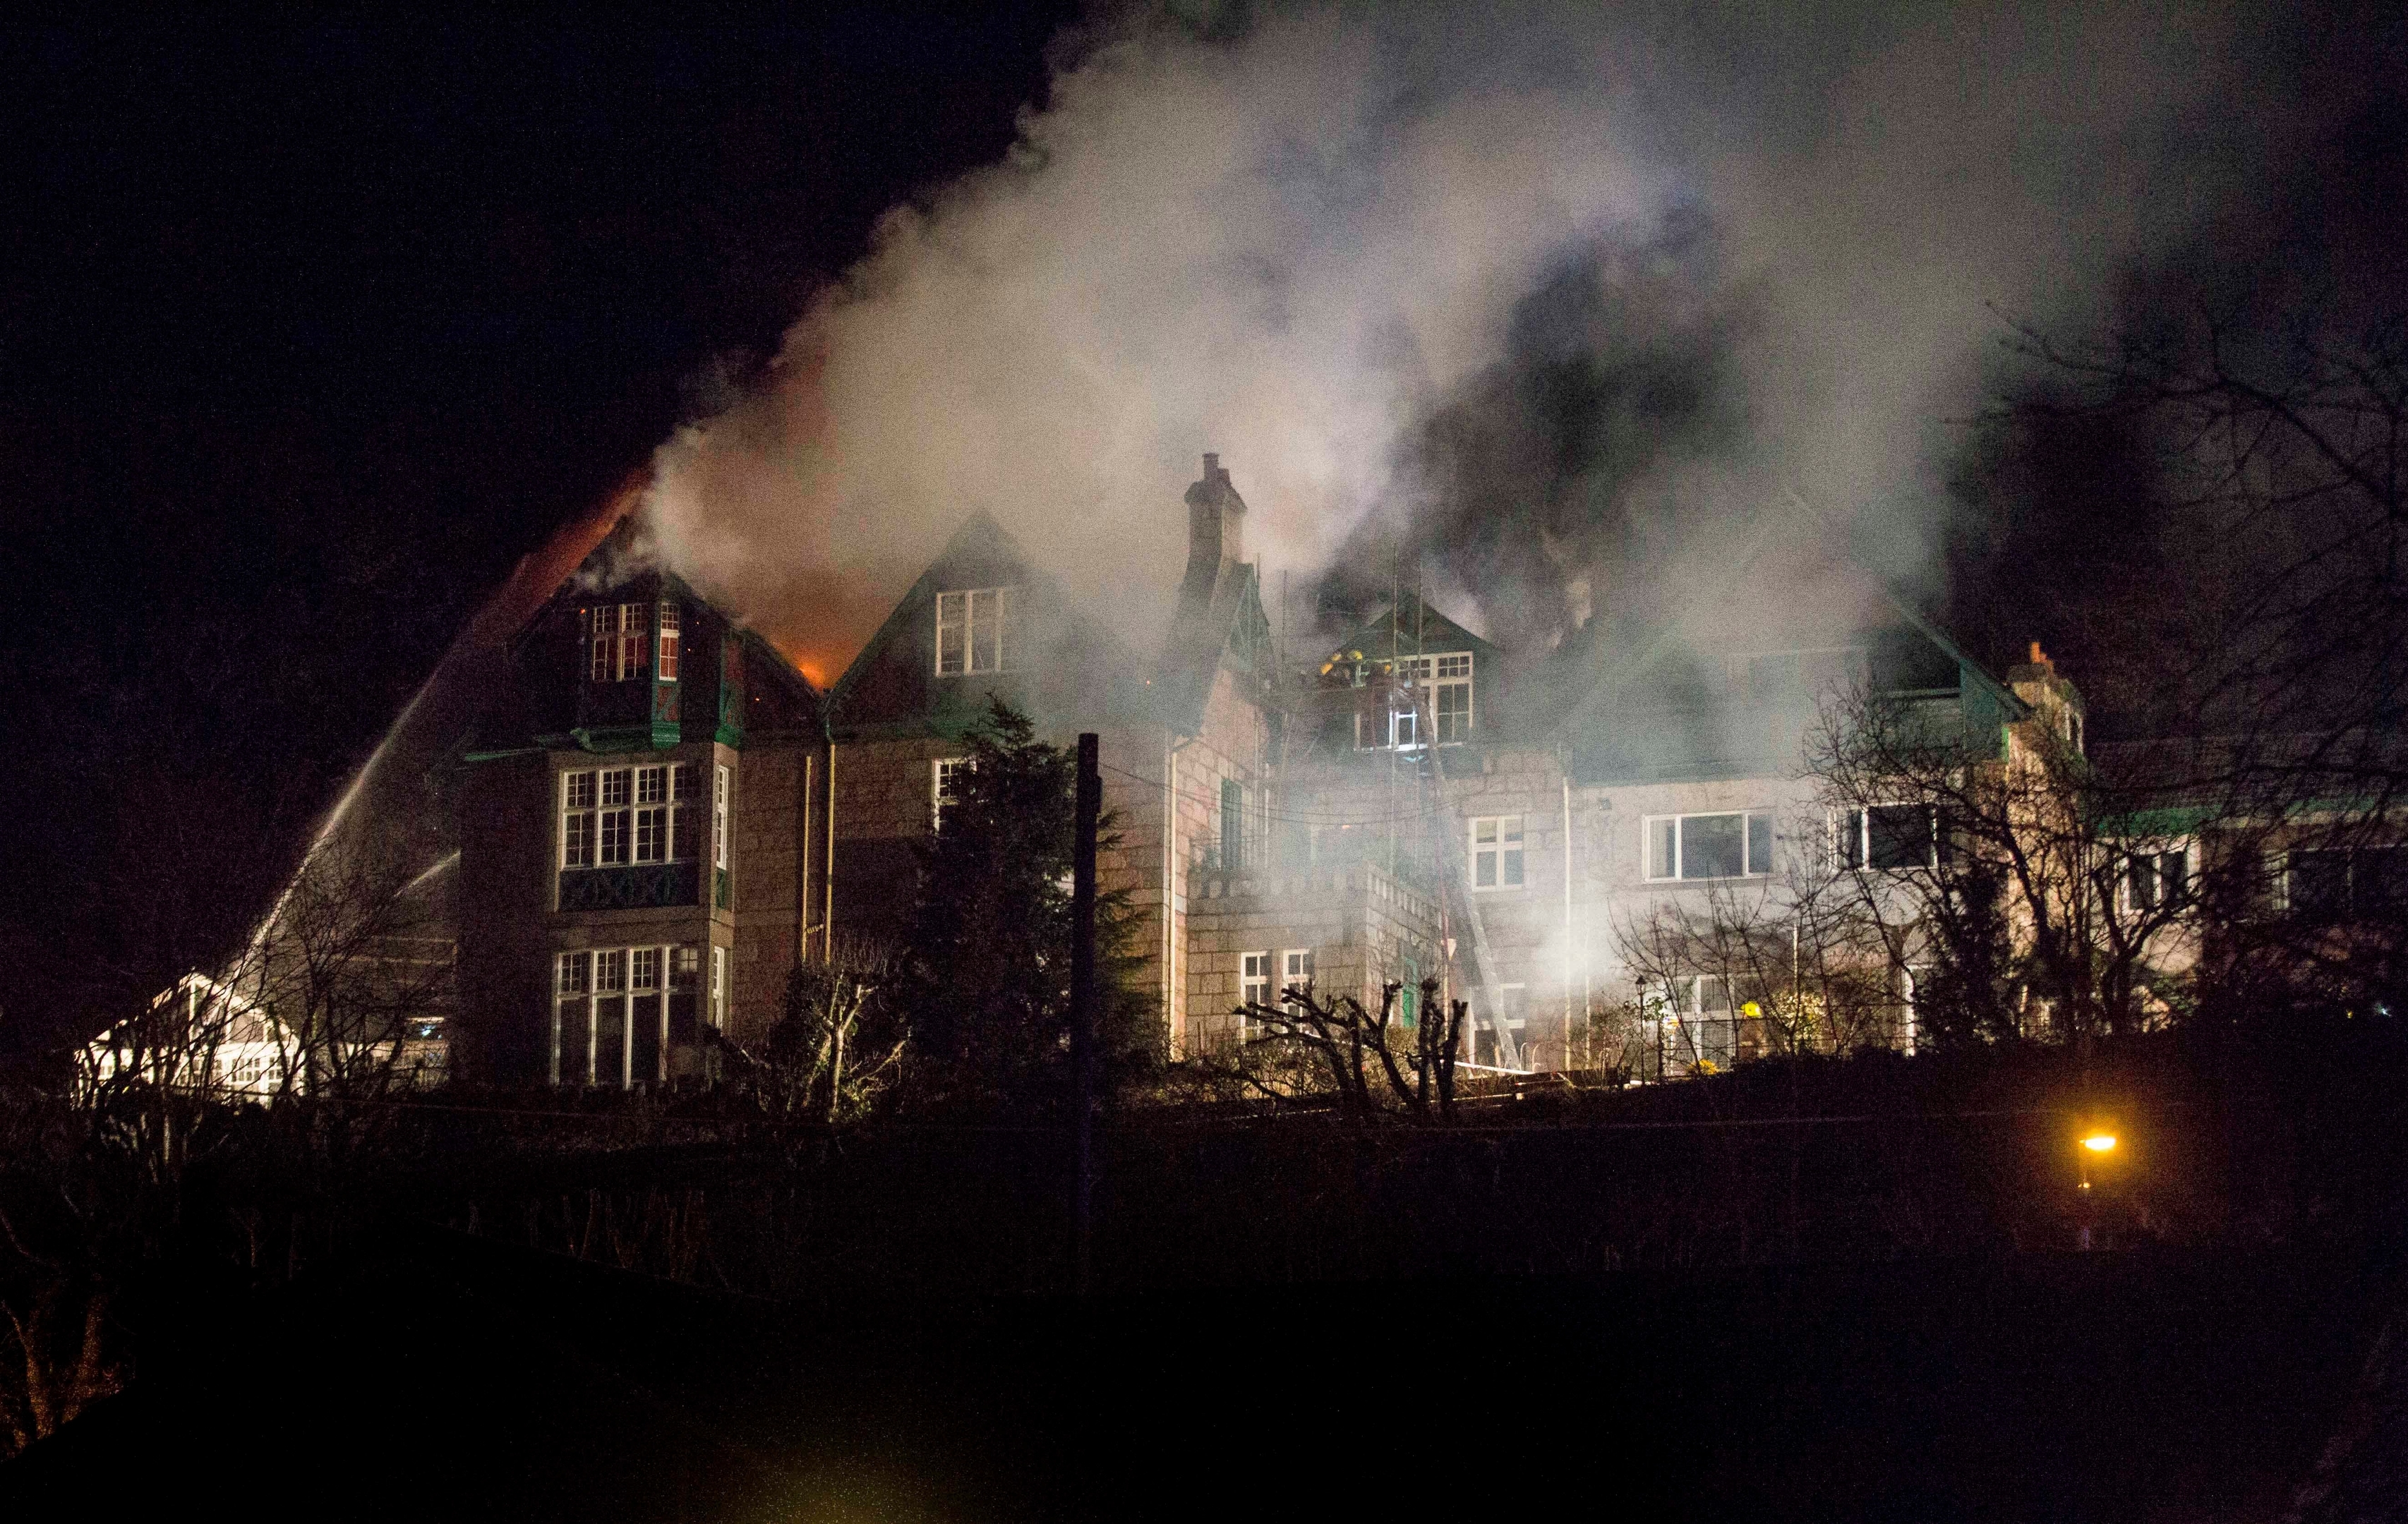 Over 50 firefighters spent six hours tackling the blaze